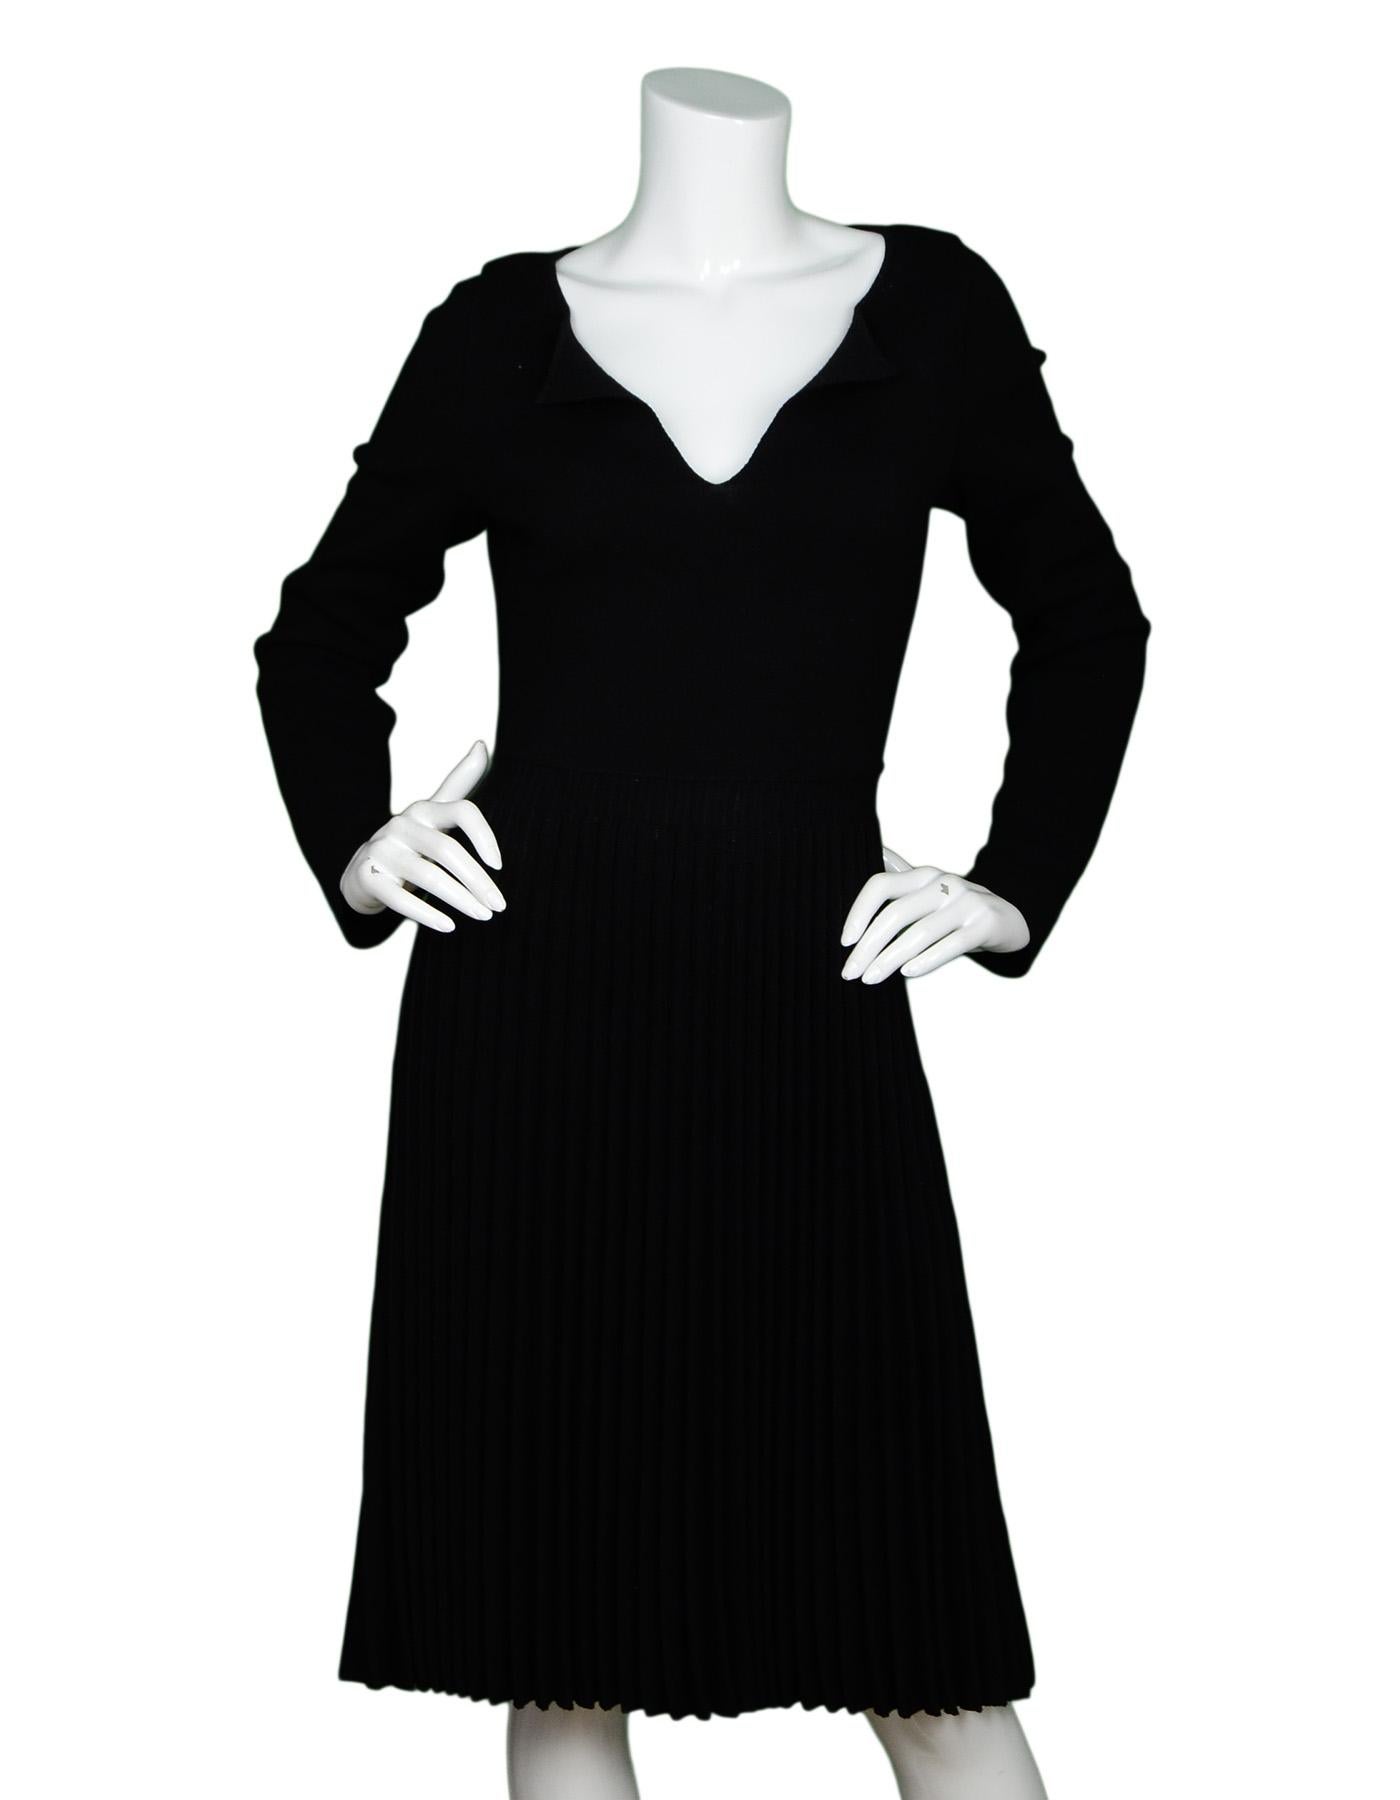 Valentino Black Wool Long Sleeve V Neck Pleated Dress Sz M

Made In: Italy
Color: Black
Materials: 88% wool, 12% viscose 
Opening/Closure: Pull over
Overall Condition: Excellent pre-owned condition 

Measurements: 
Shoulder To Shoulder: 15